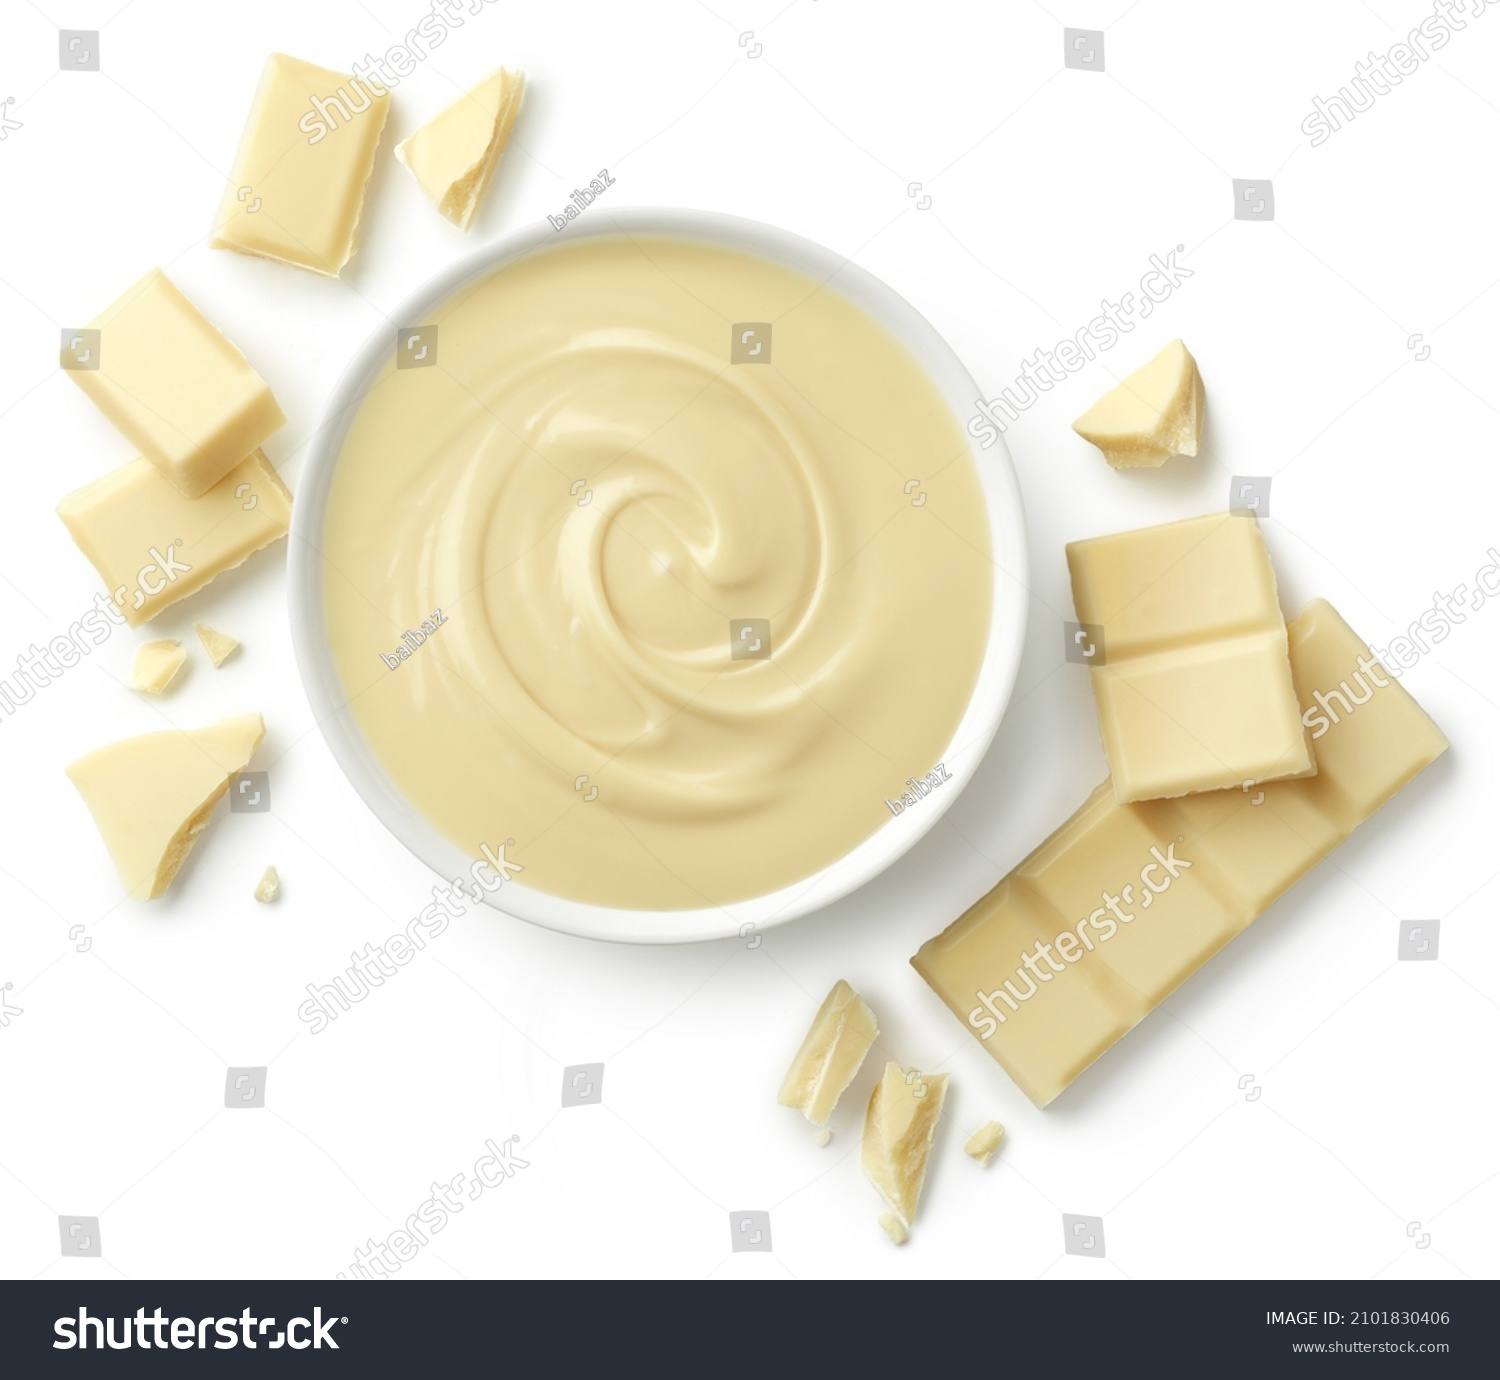 Bowl of melted white chocolate and broken pieces of chocolate bar isolated on white background #2101830406